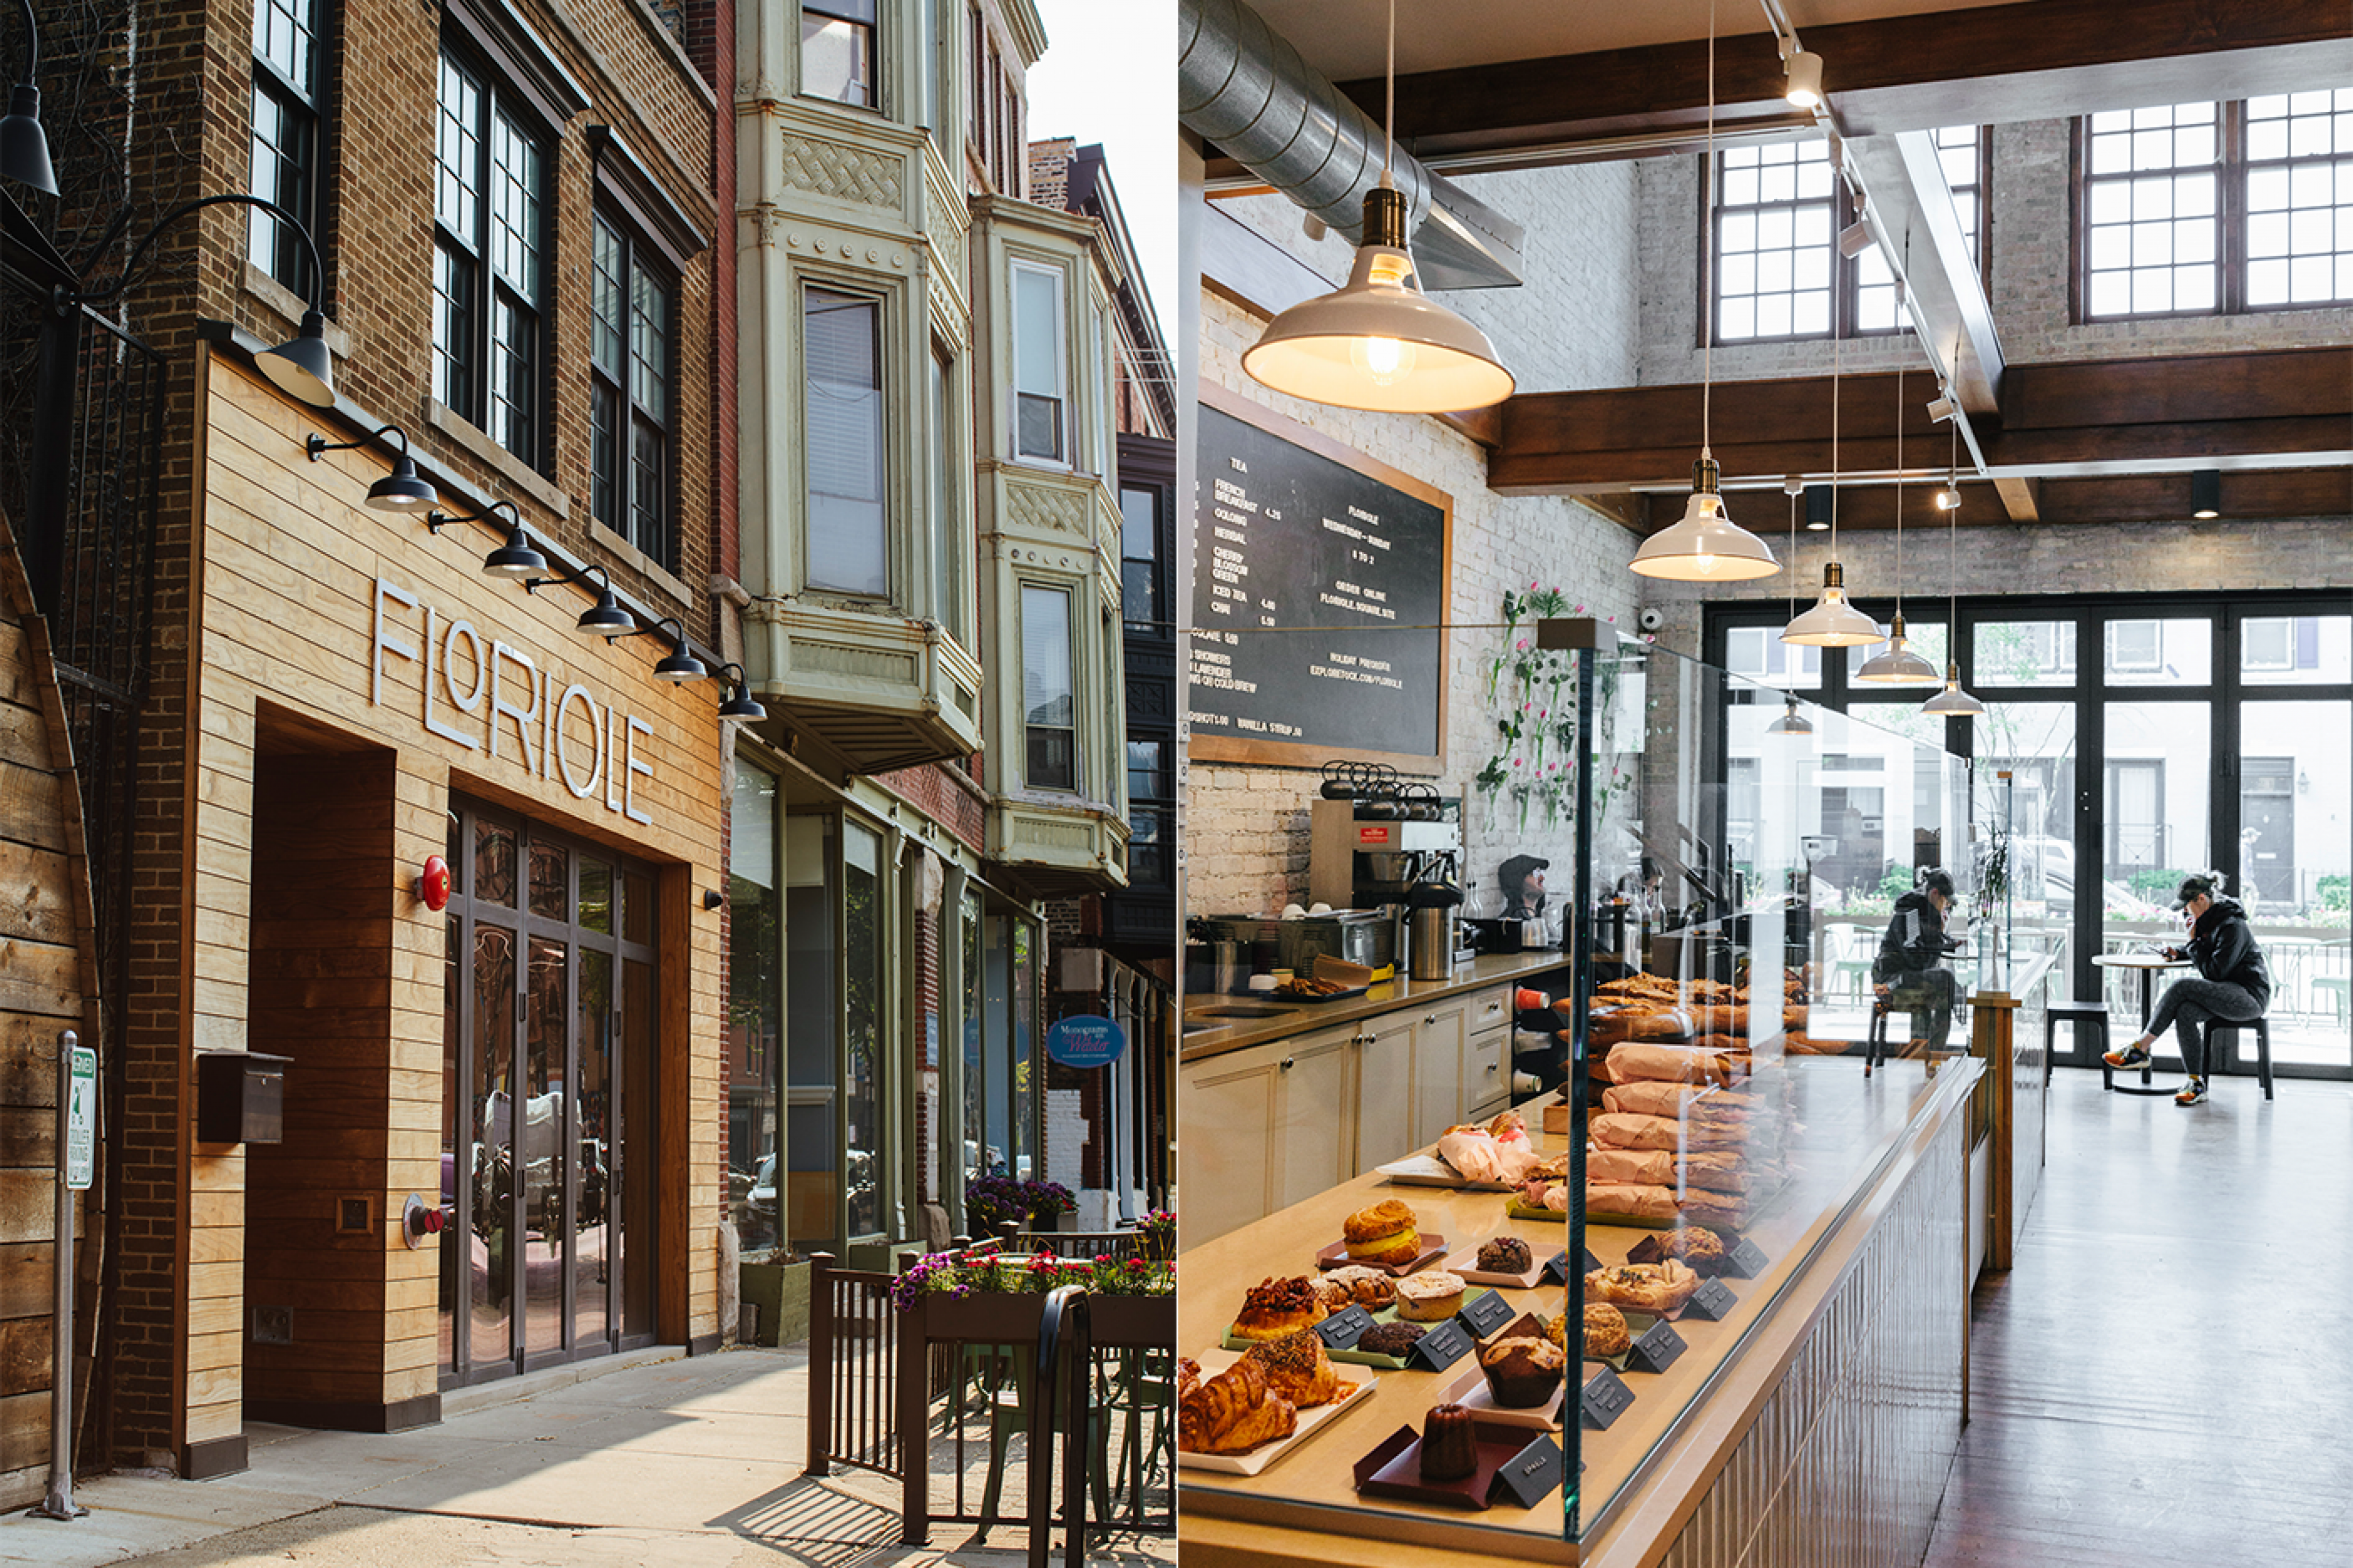 Exterior and Interior of bakery in Chicago